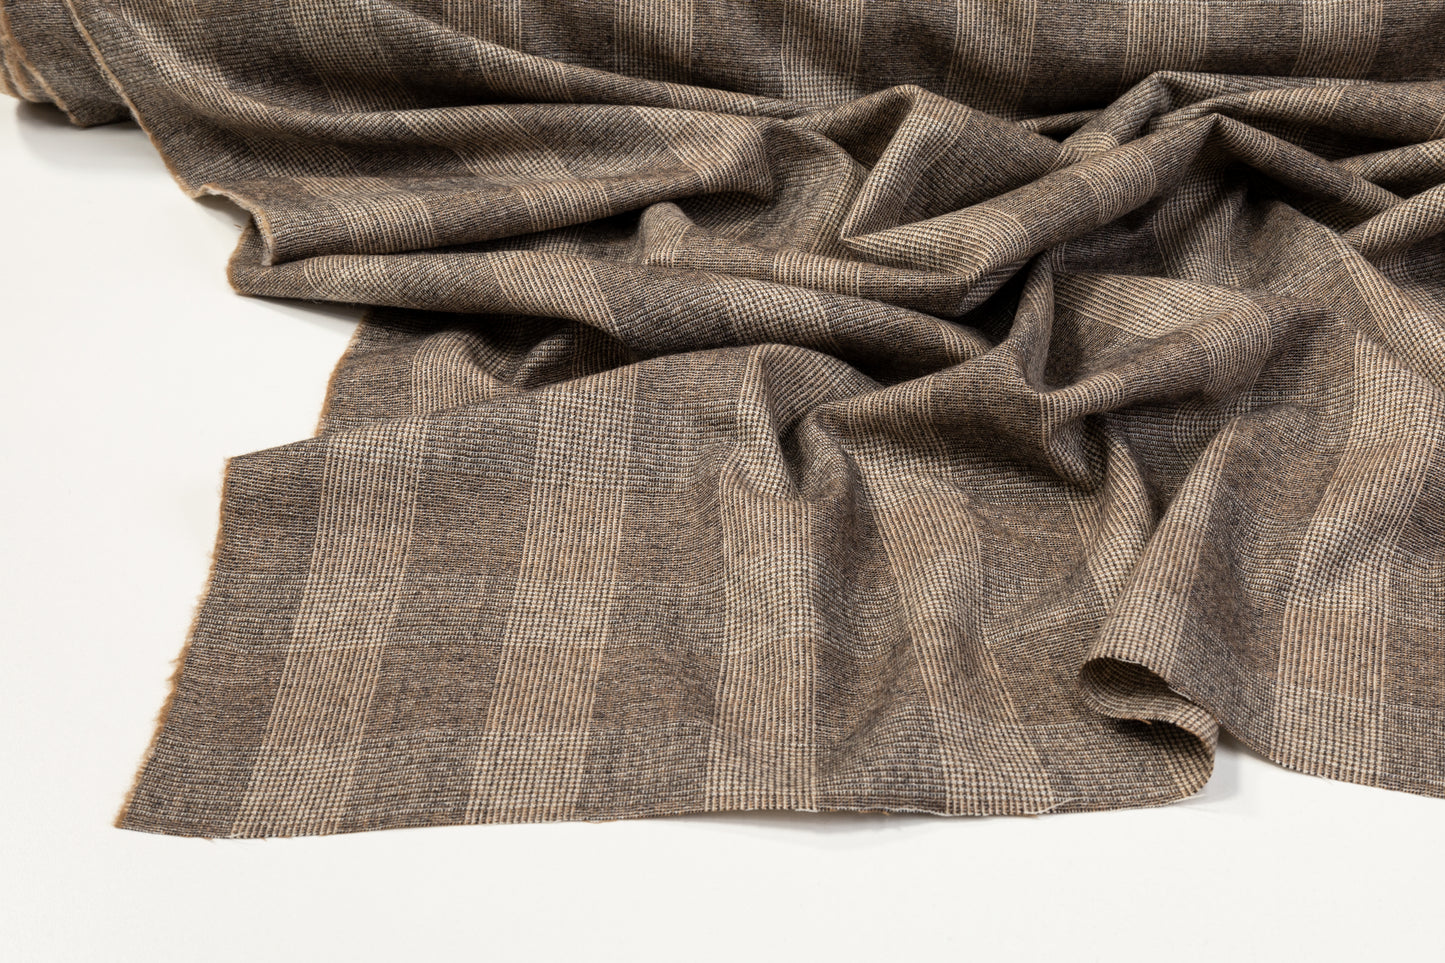 Checked Cashmere Wool Suiting - Desert Brown